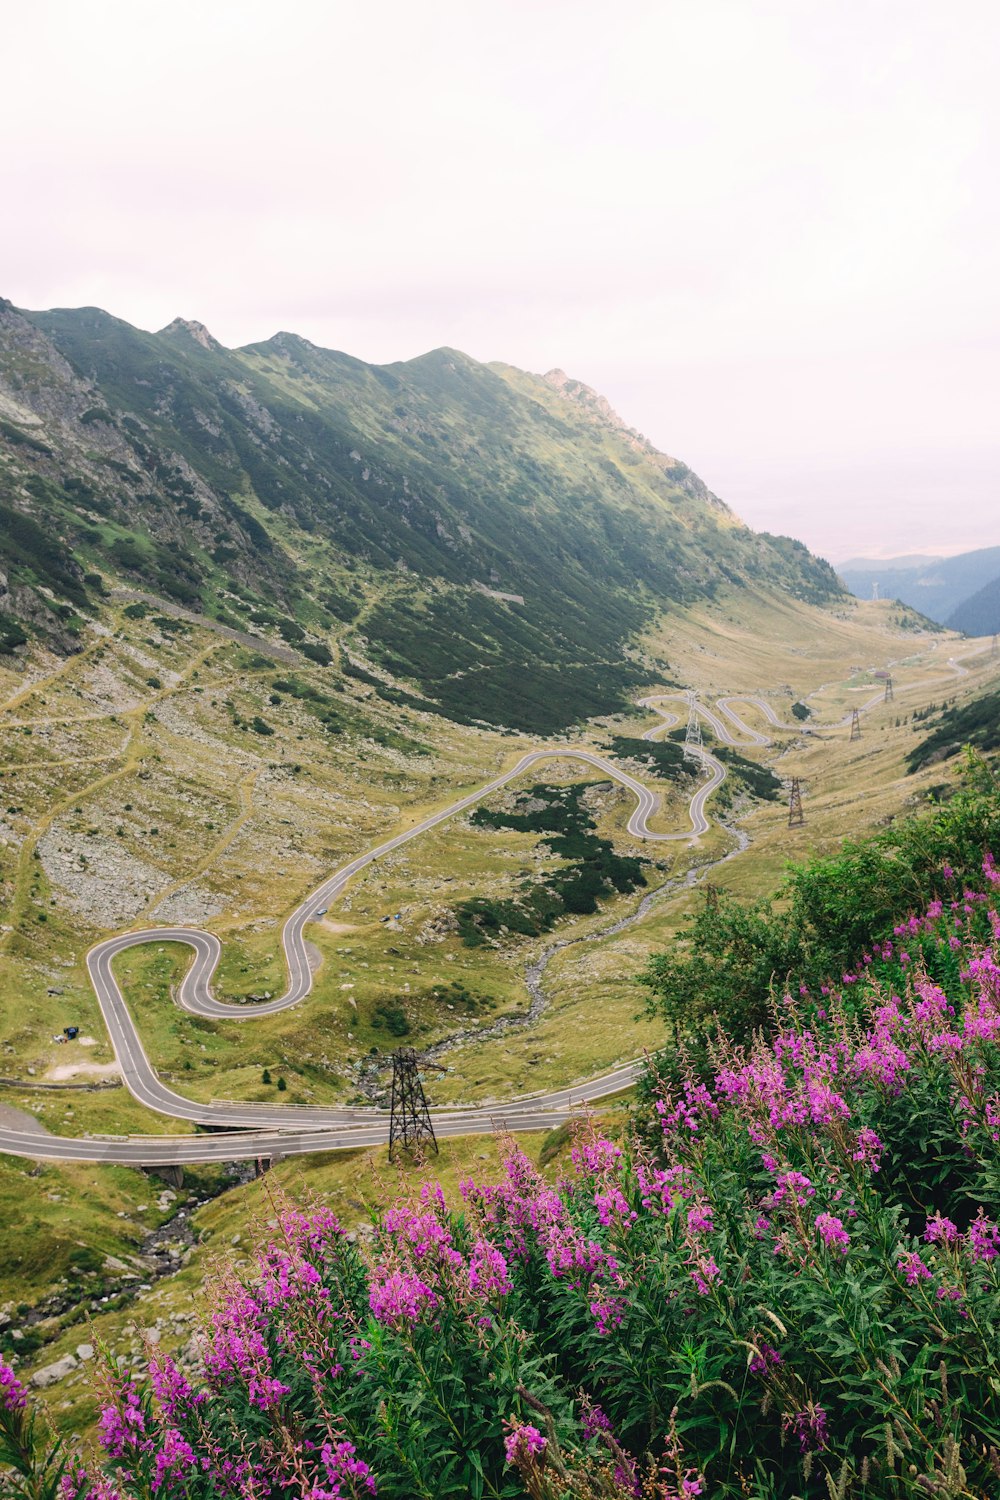 a winding road in the mountains surrounded by flowers